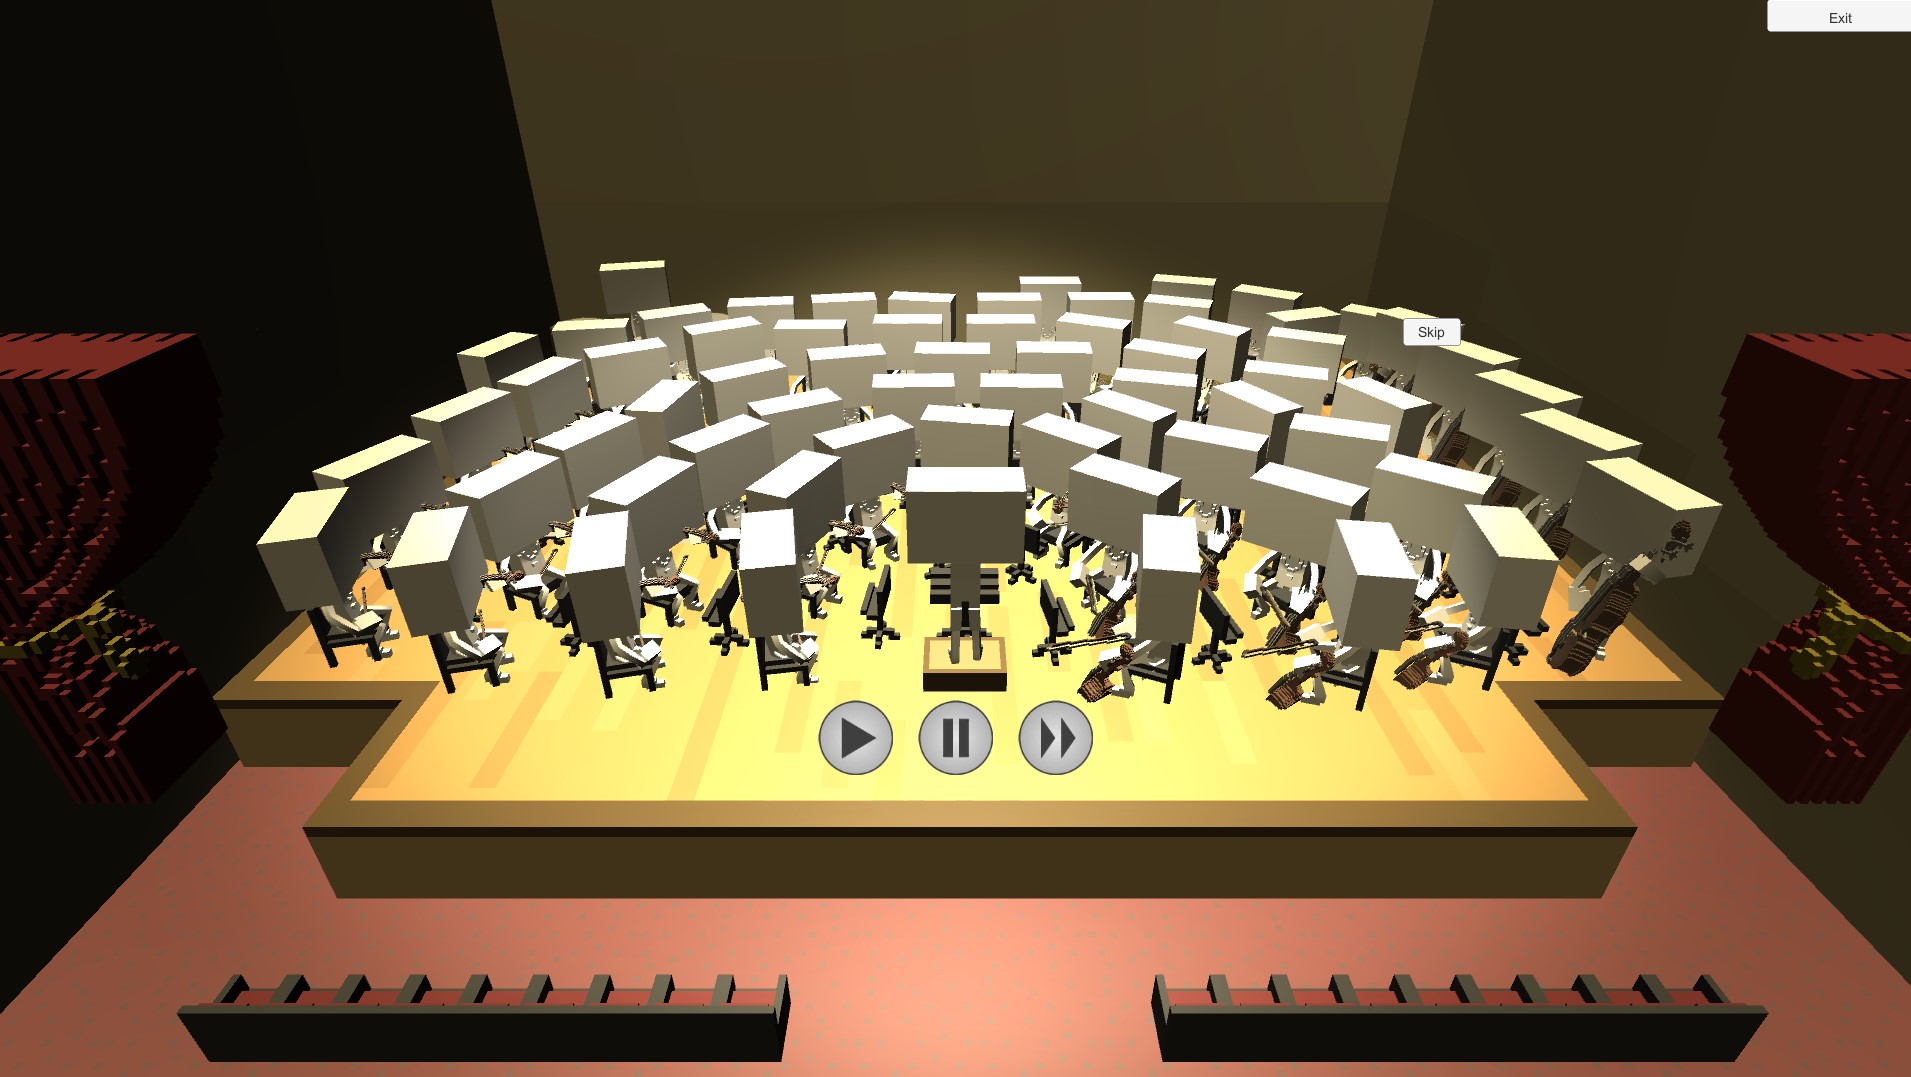 Orchestra games